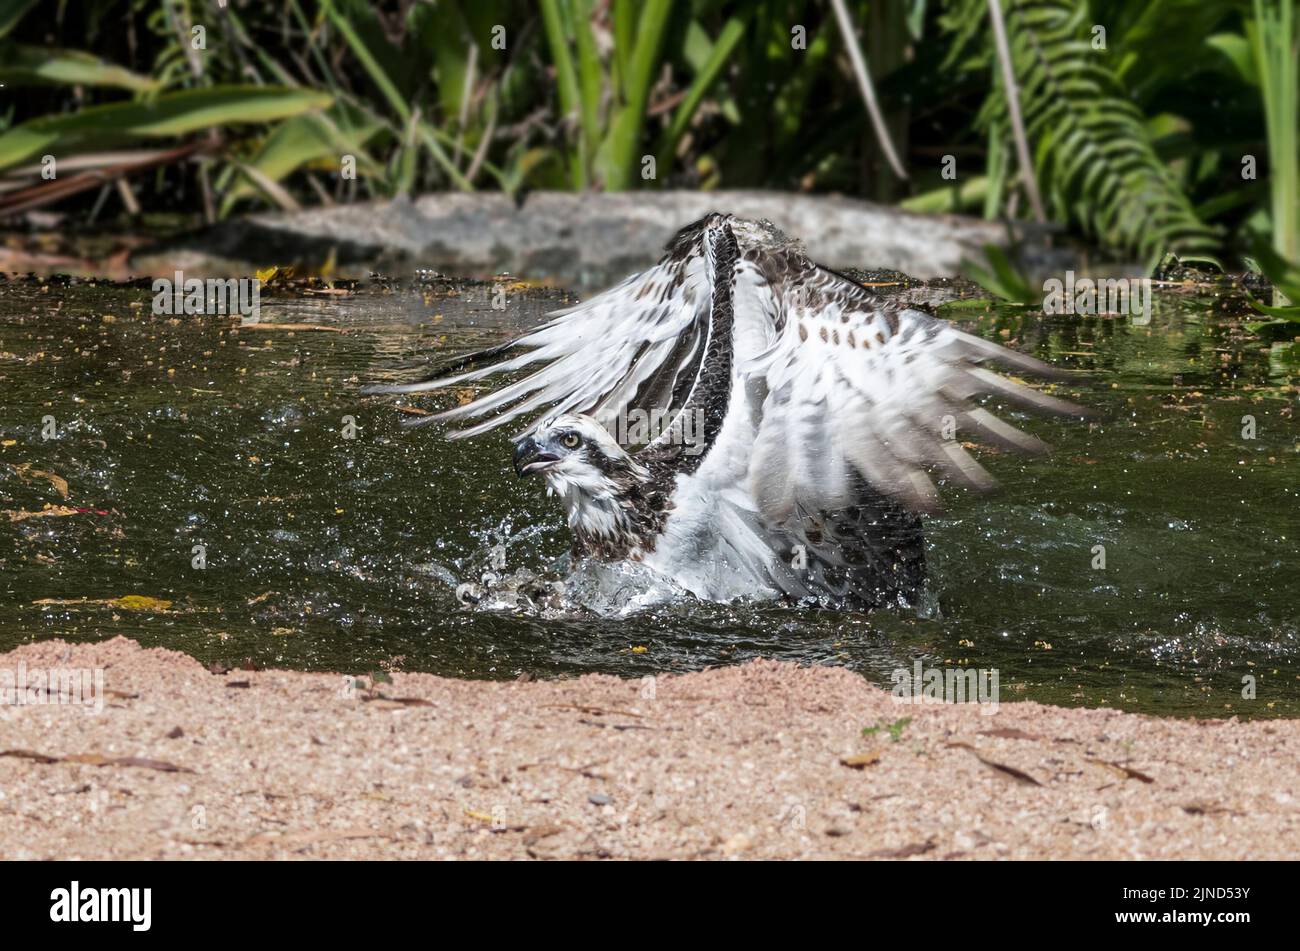 Eastern Osprey (Pandion cristatus) diving for fish, Wildlife Territory Park, Darwin, Northern Territory, NT, Australia. Controlled conditions. Stock Photo